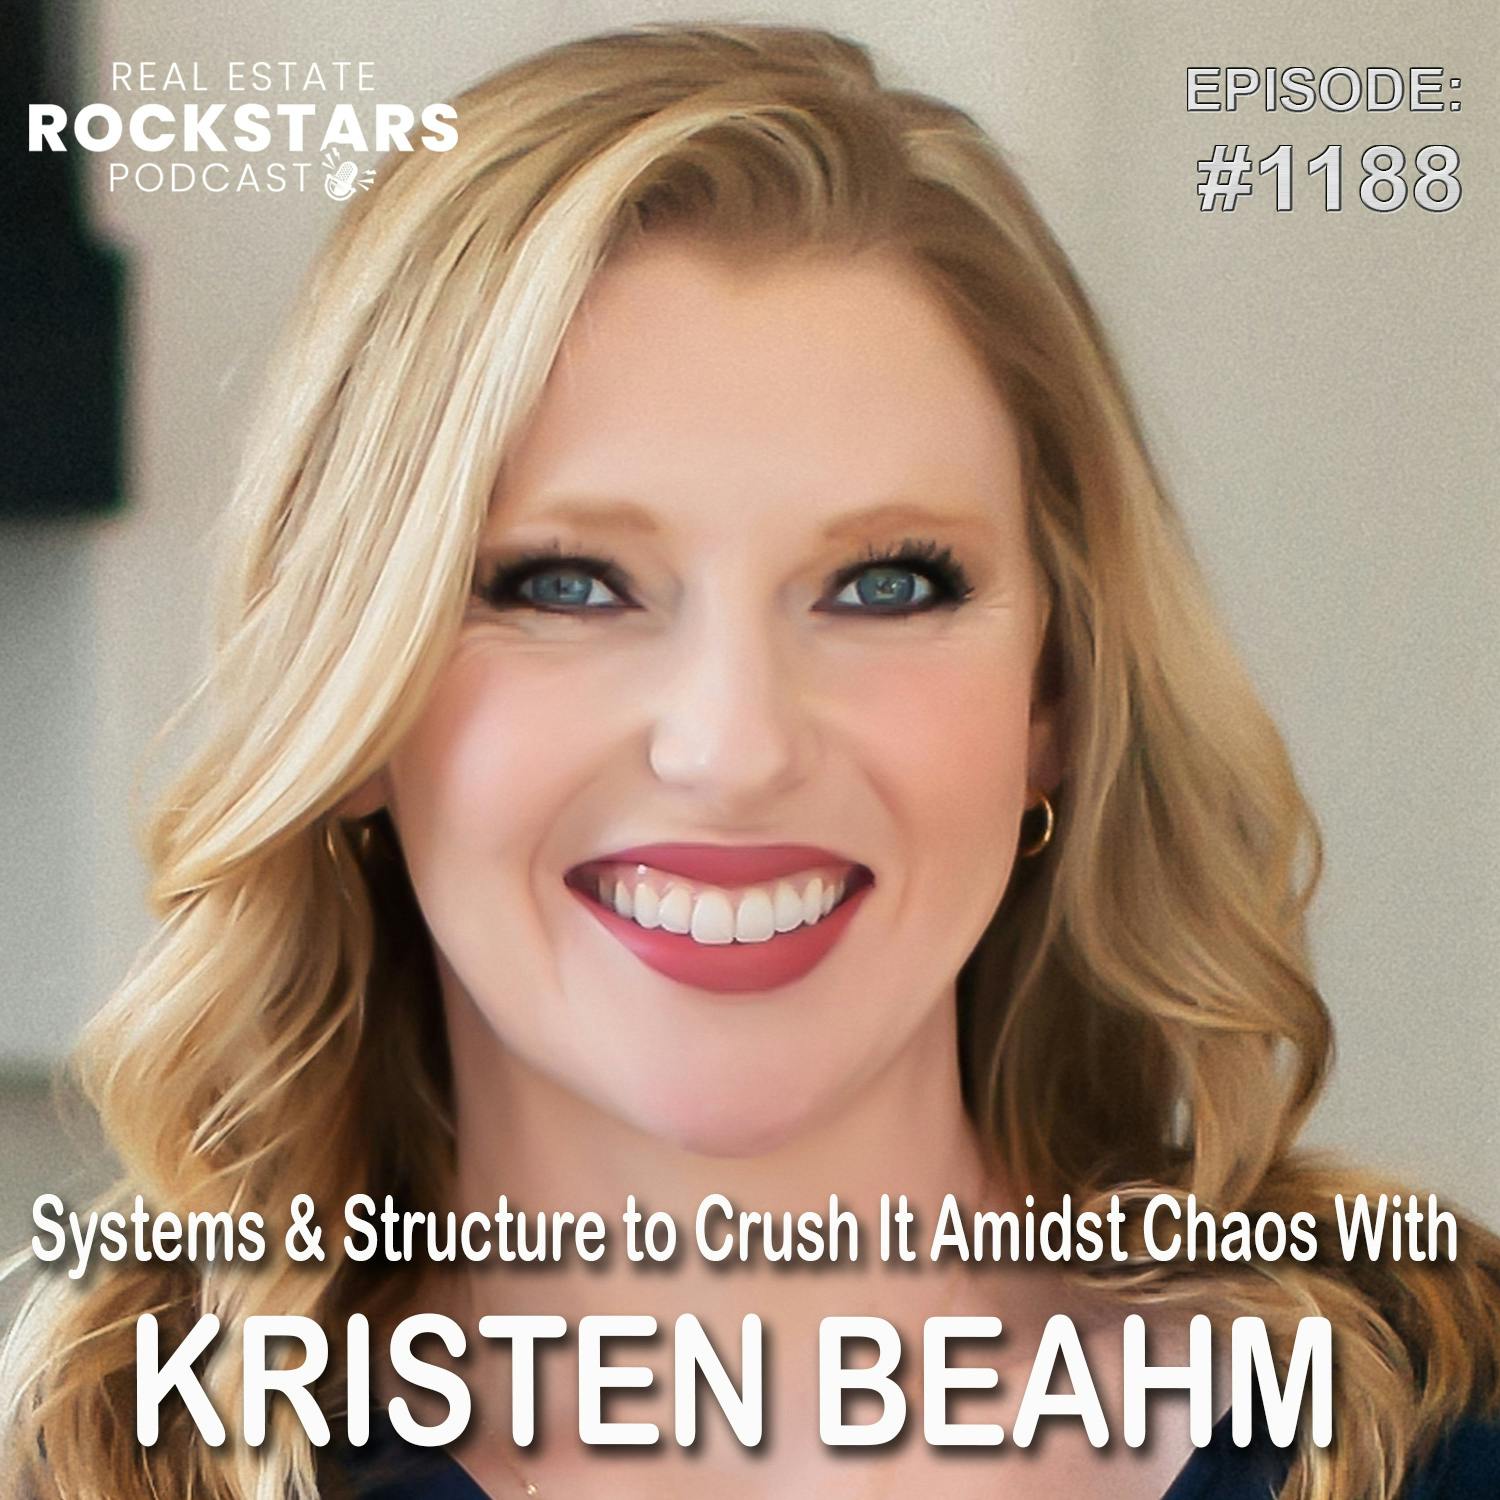 1188: Systems & Structure to Crush It Amidst Chaos With Kristen Beahm